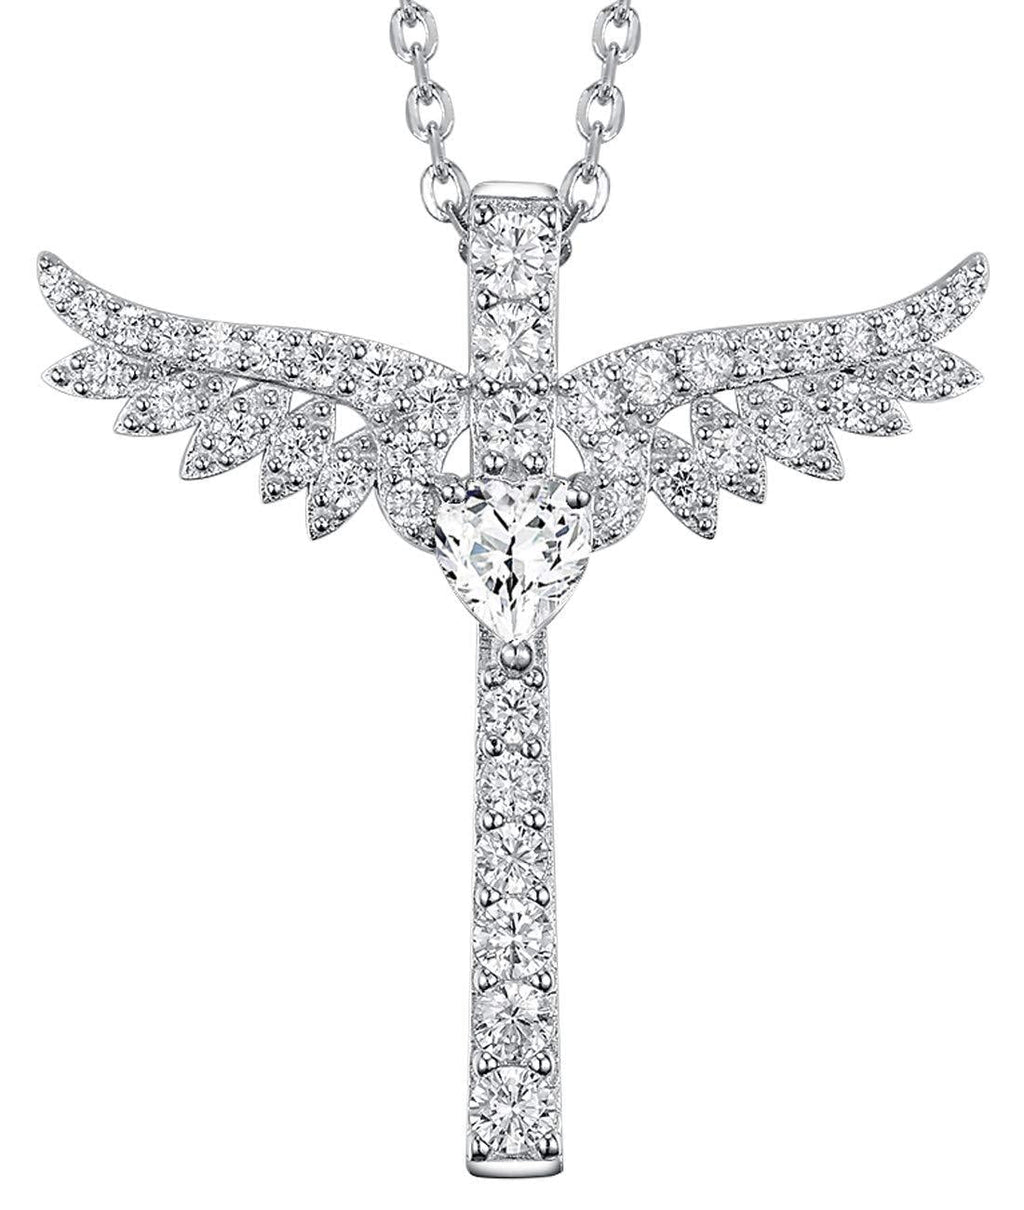 [Australia] - Re Besta April Birthstone Simulated Diamond Necklace for Women Teen Girls Birthday Gifts Angel Wings Jewelry Sterling Silver Aquamarine Necklace April Birthstone Angel Wings Love Heart Necklace 